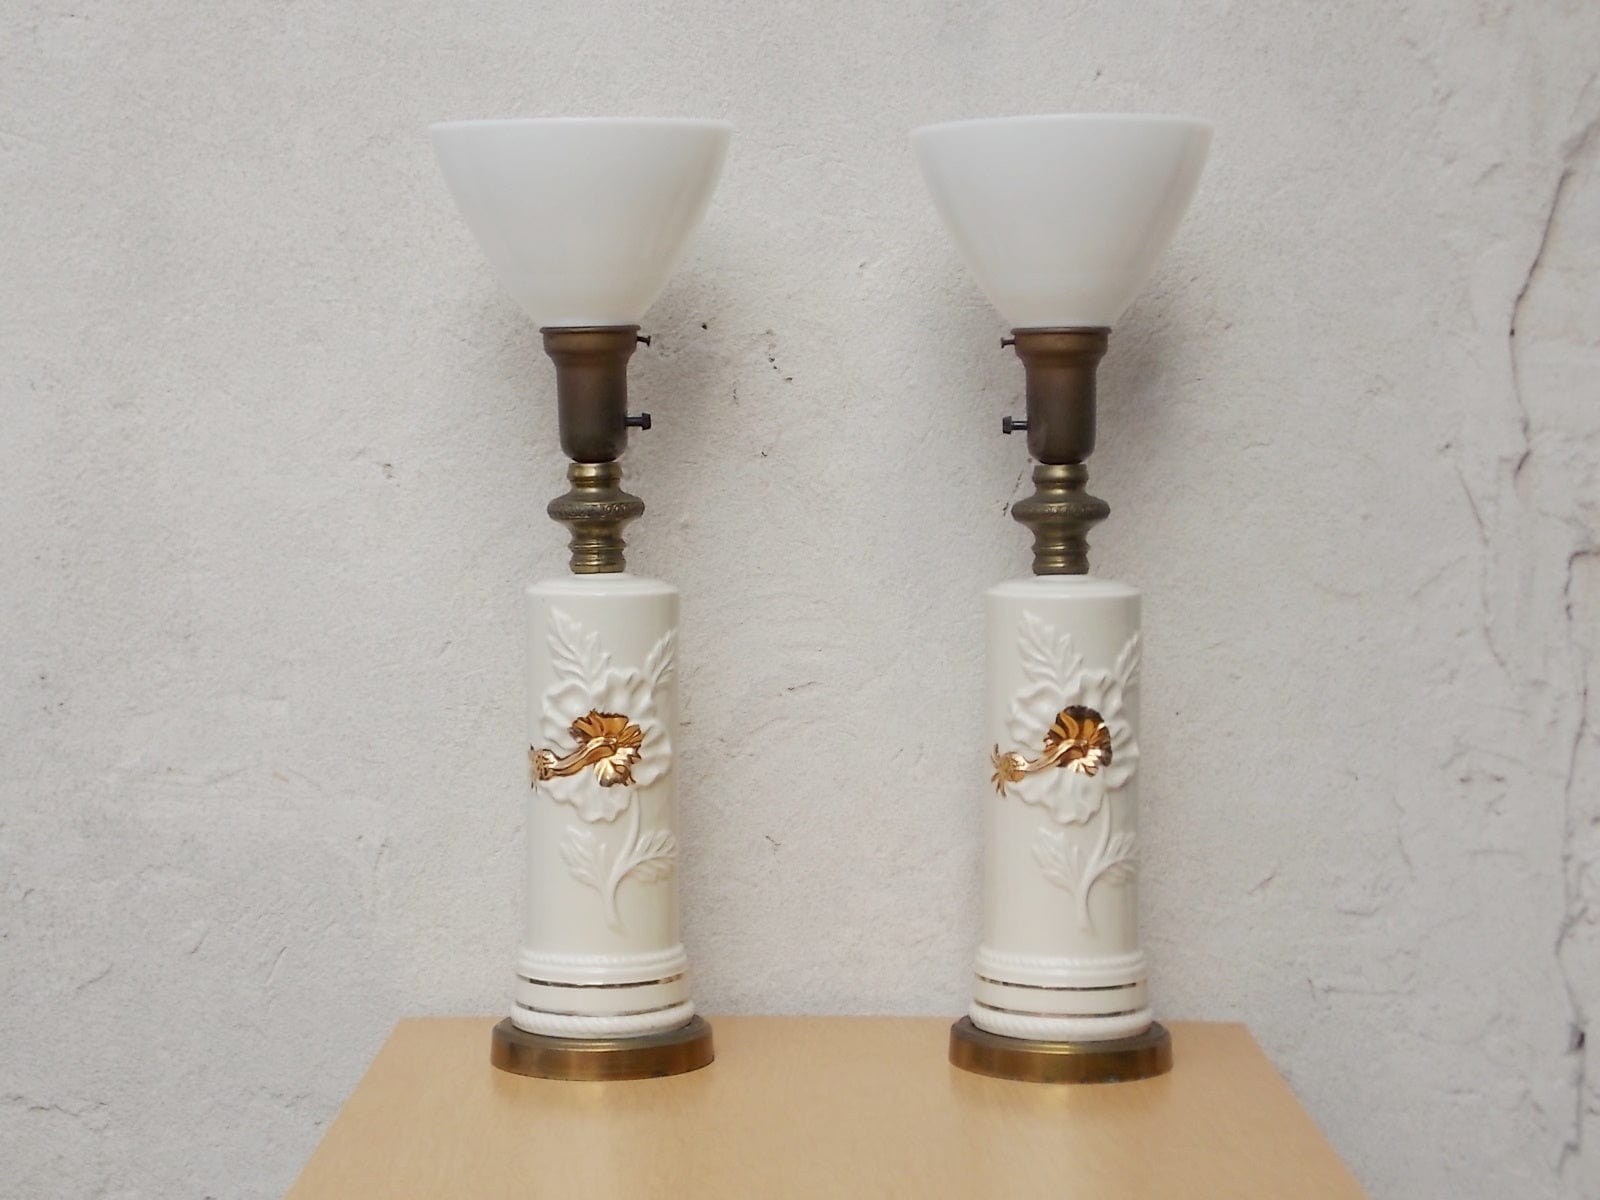 I Like Mike's Mid Century Modern lighting Pair White Ceramic & Glass Torchier Table Lamps with Gold Hibiscus Flower